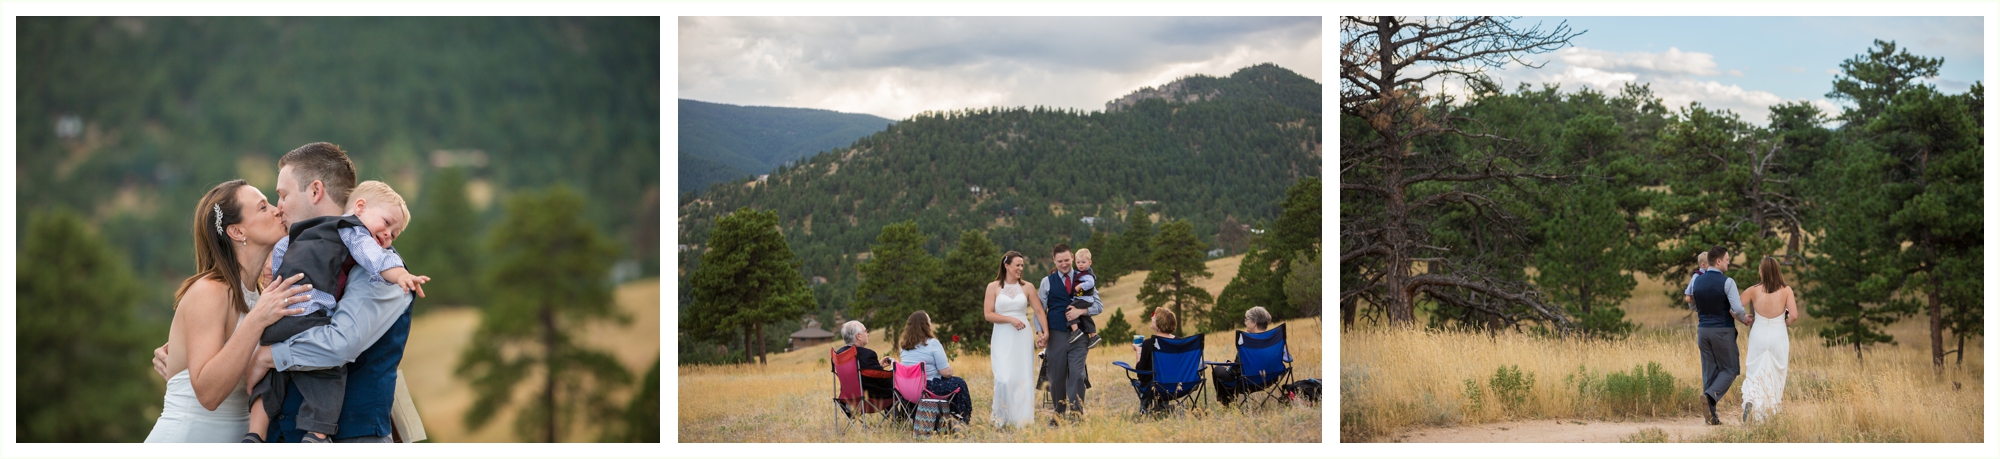 candid moments during wedding ceremony in boulder colorado 